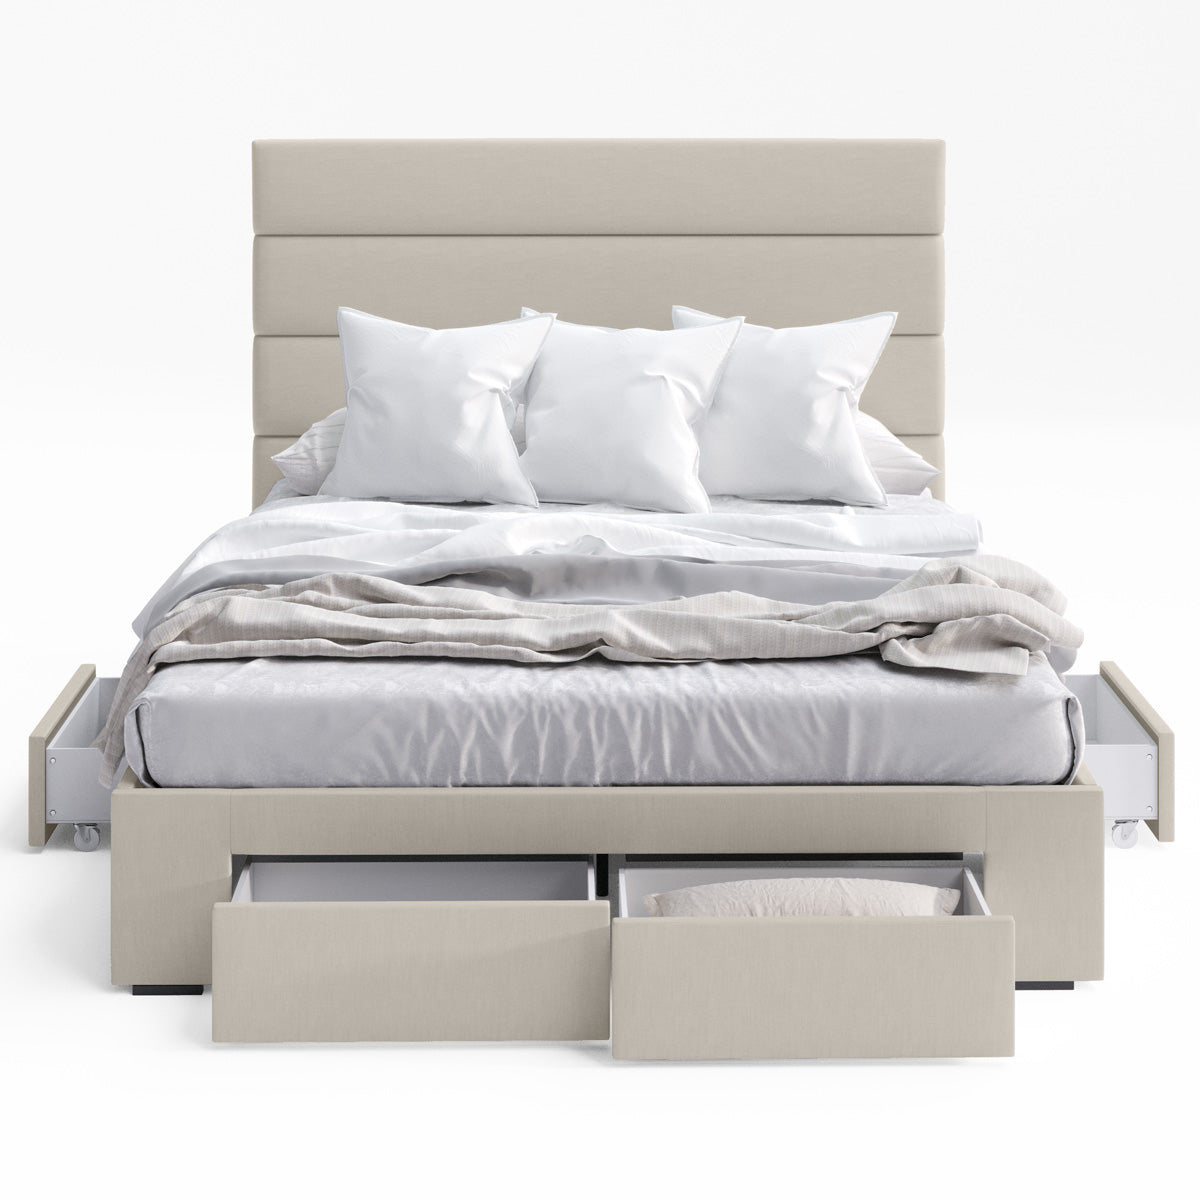 Benny Bed Frame with Four Storage Drawers (Natural Beige Fabric)